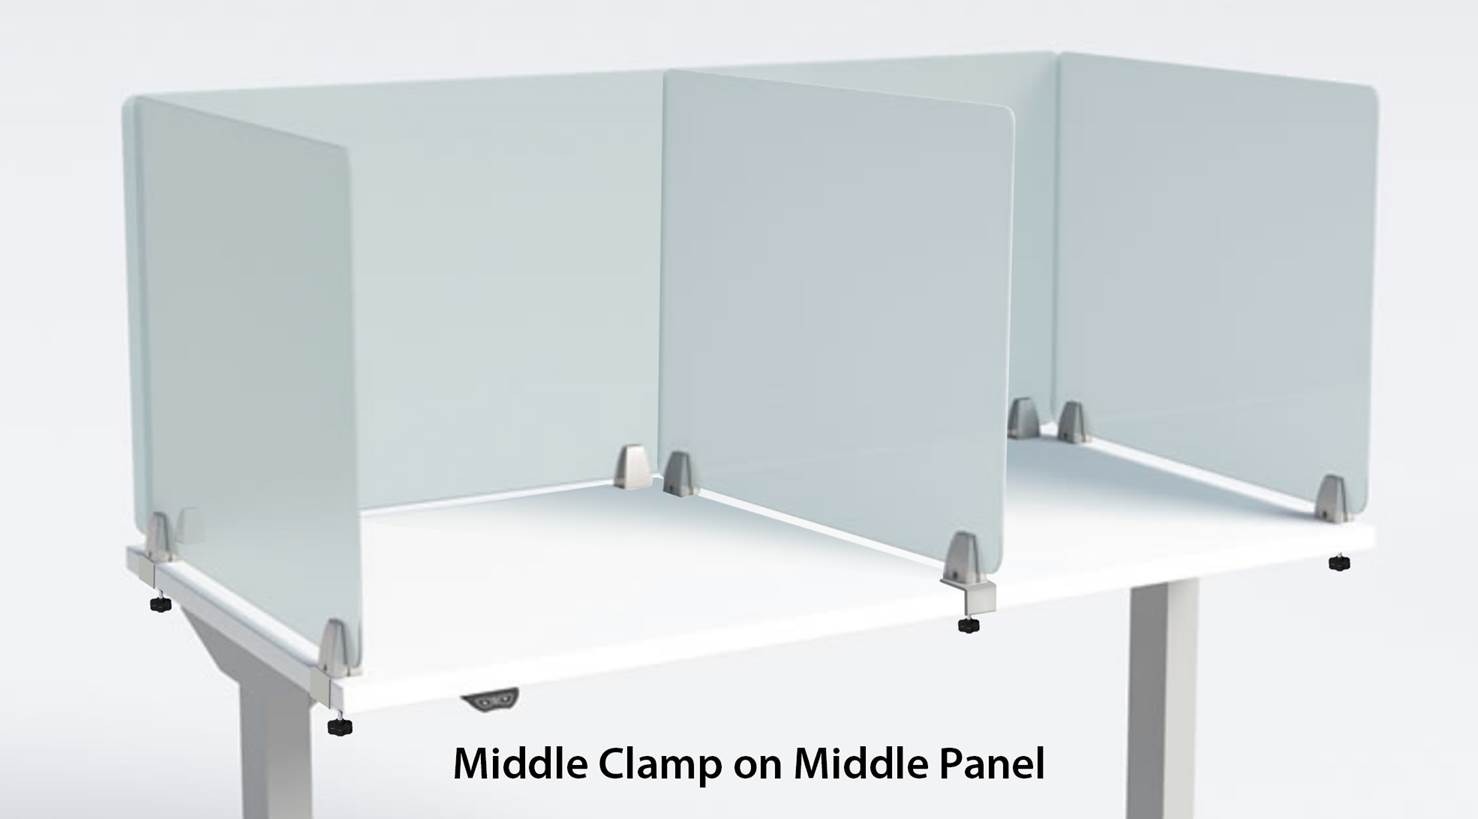 Middle clamp on middle panel